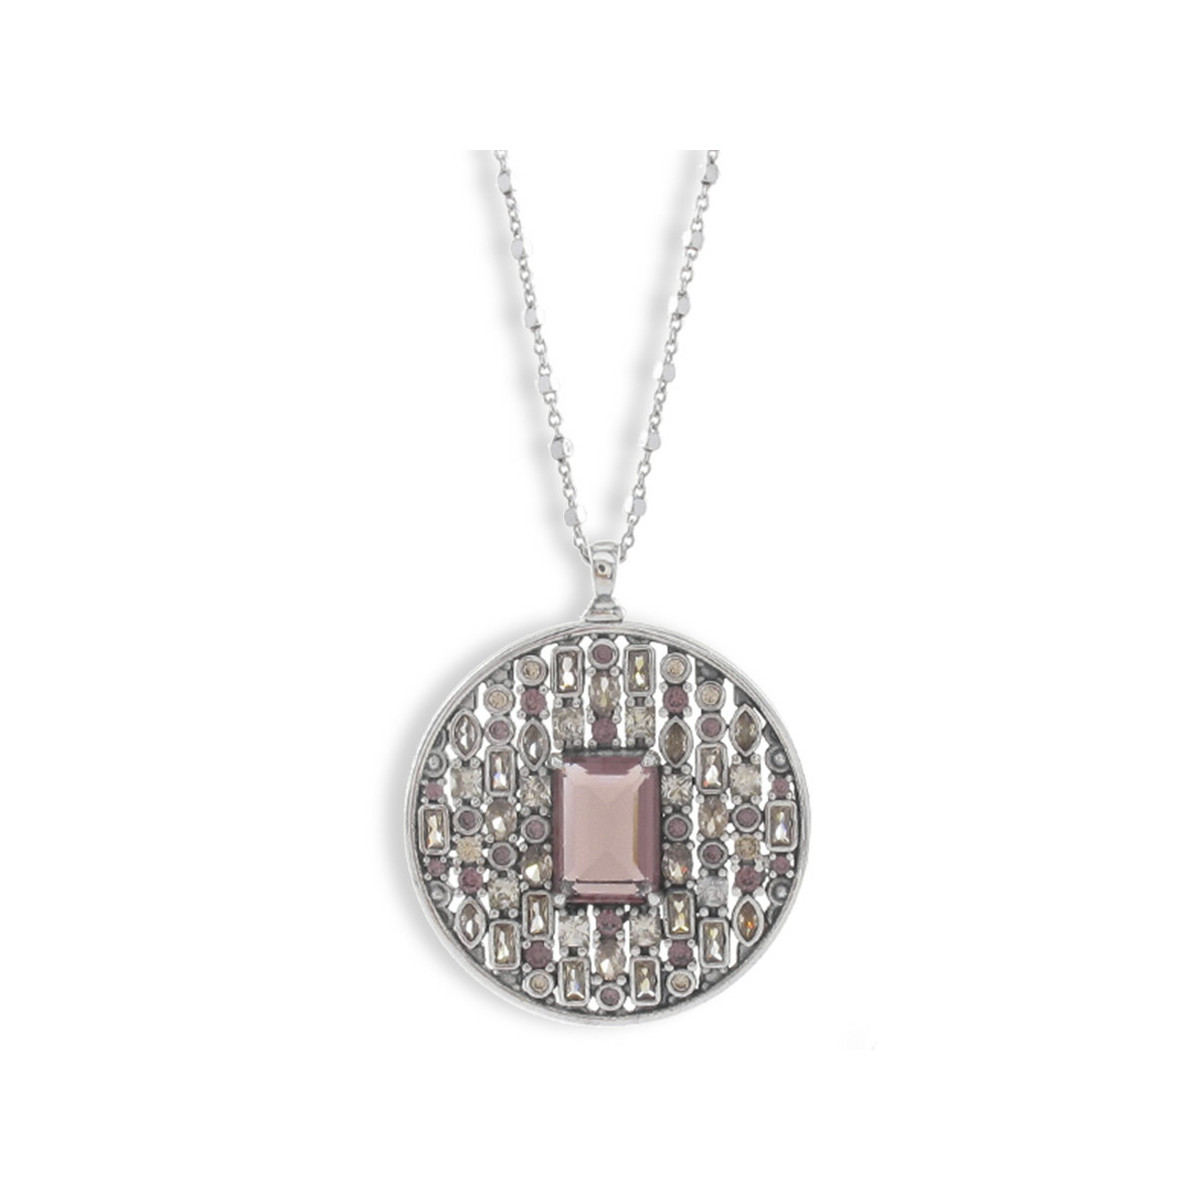 SILVER MEDALLION NECKLACE WITH RHODOLITE